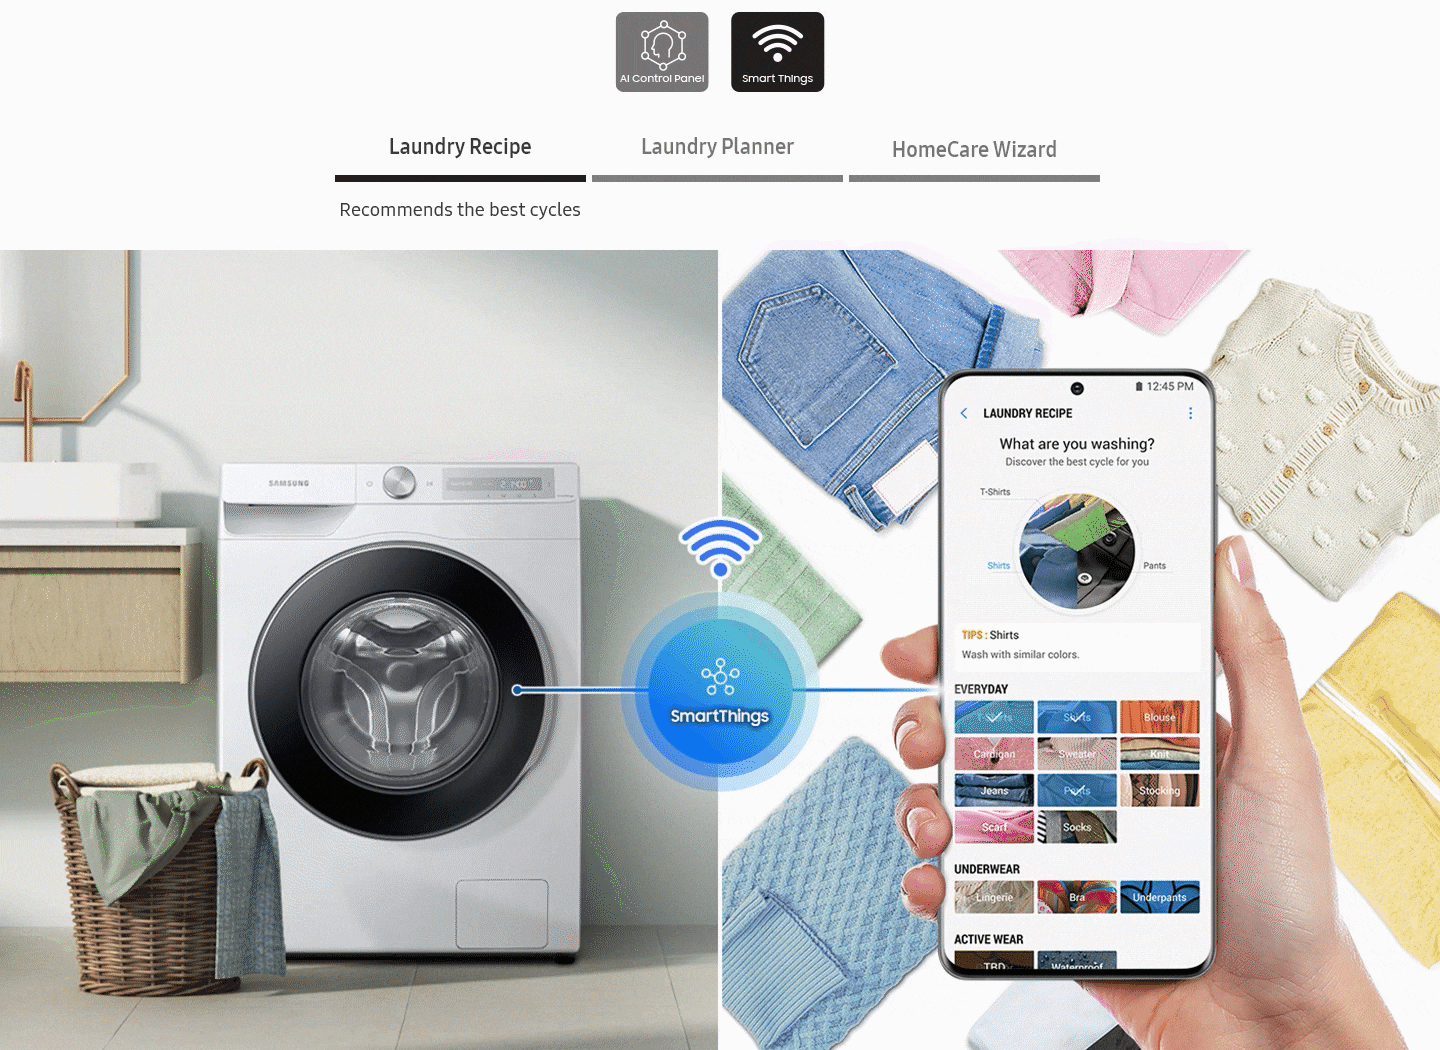 The personally-tailored wash cycle is controlled via the SmartThings app. Laundry recipe, Laundry planner, HomeCare Wizard.